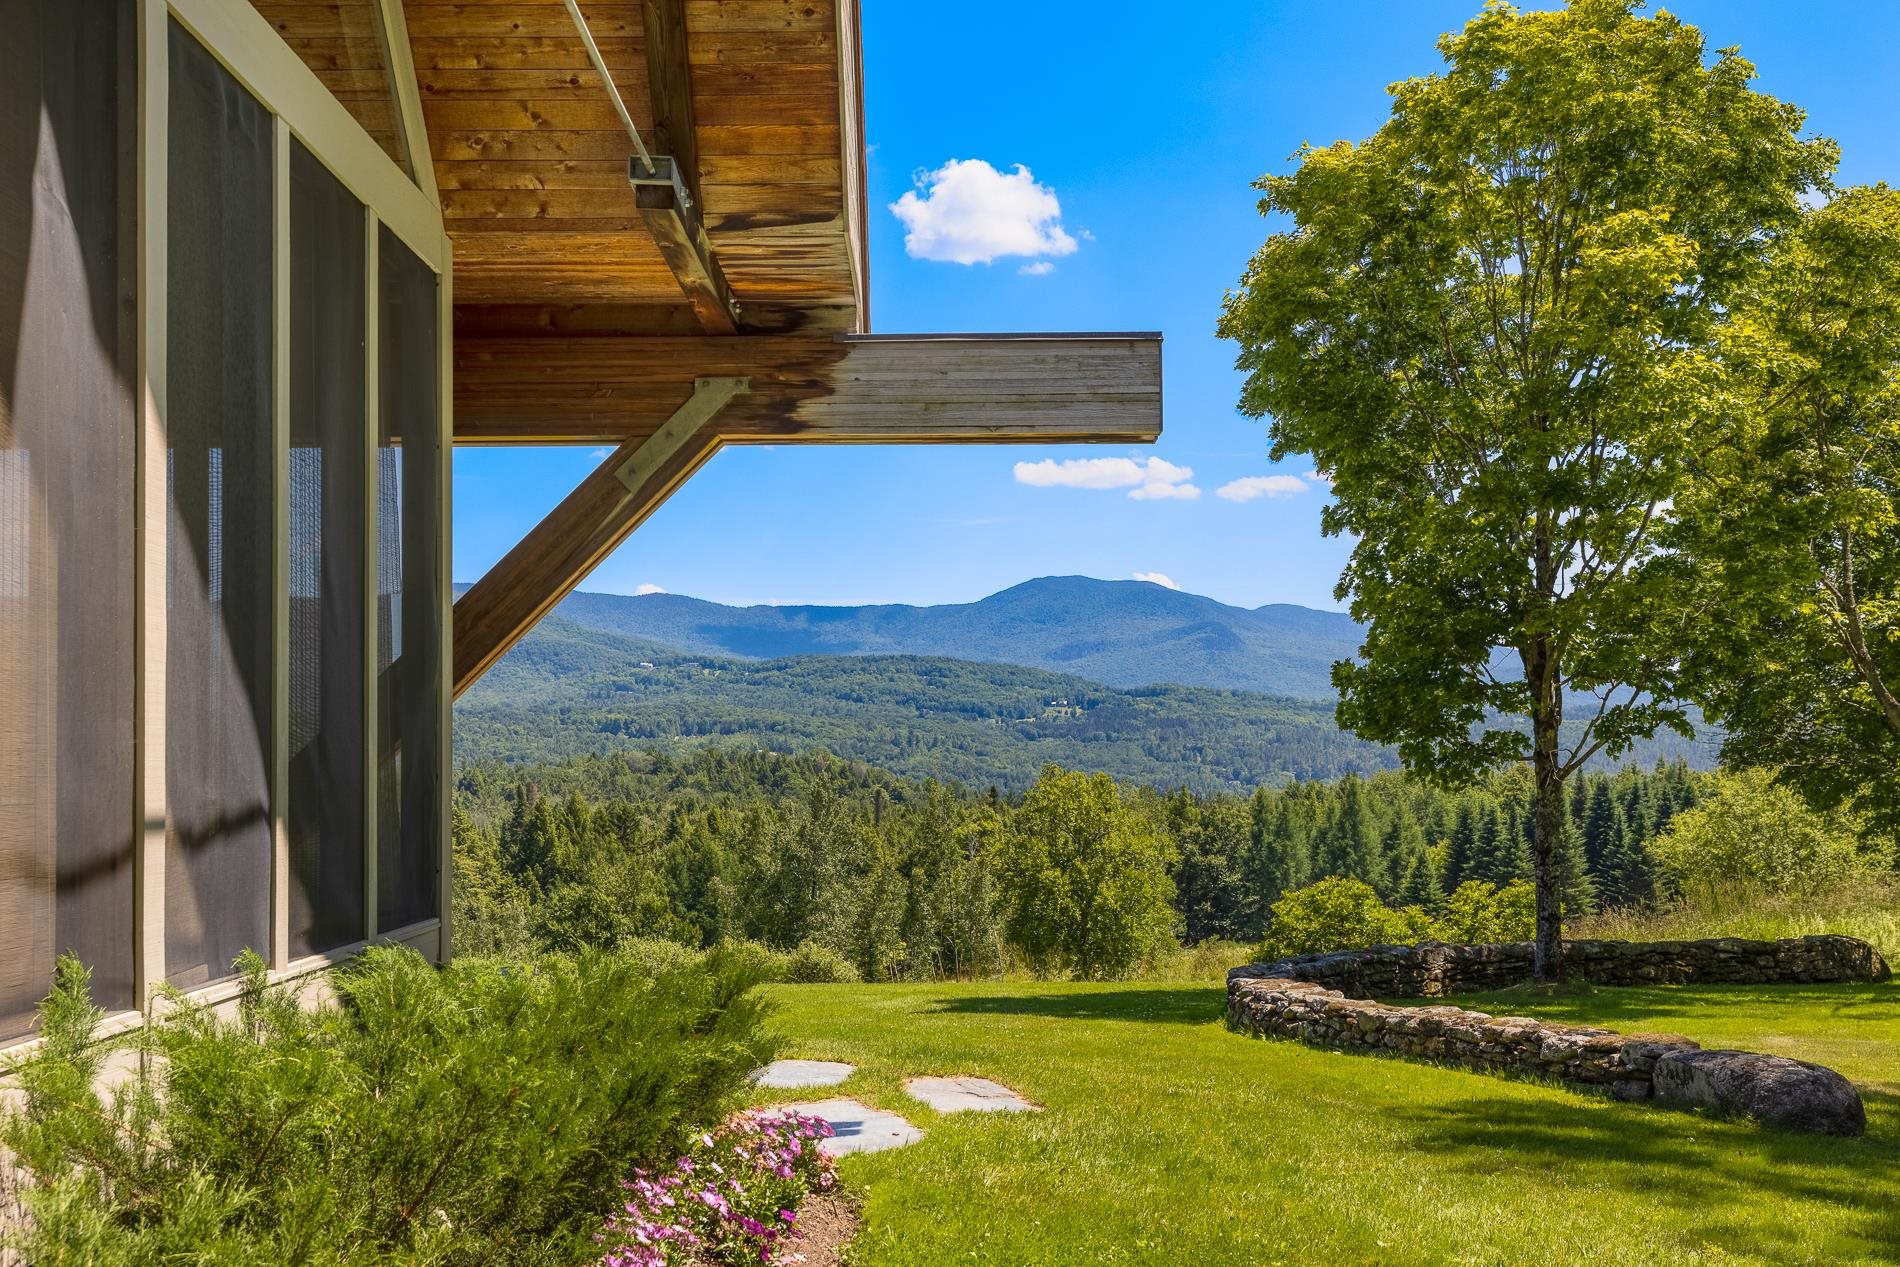 near 710 Tansy Hill Road Stowe, VT 05672 Property 1